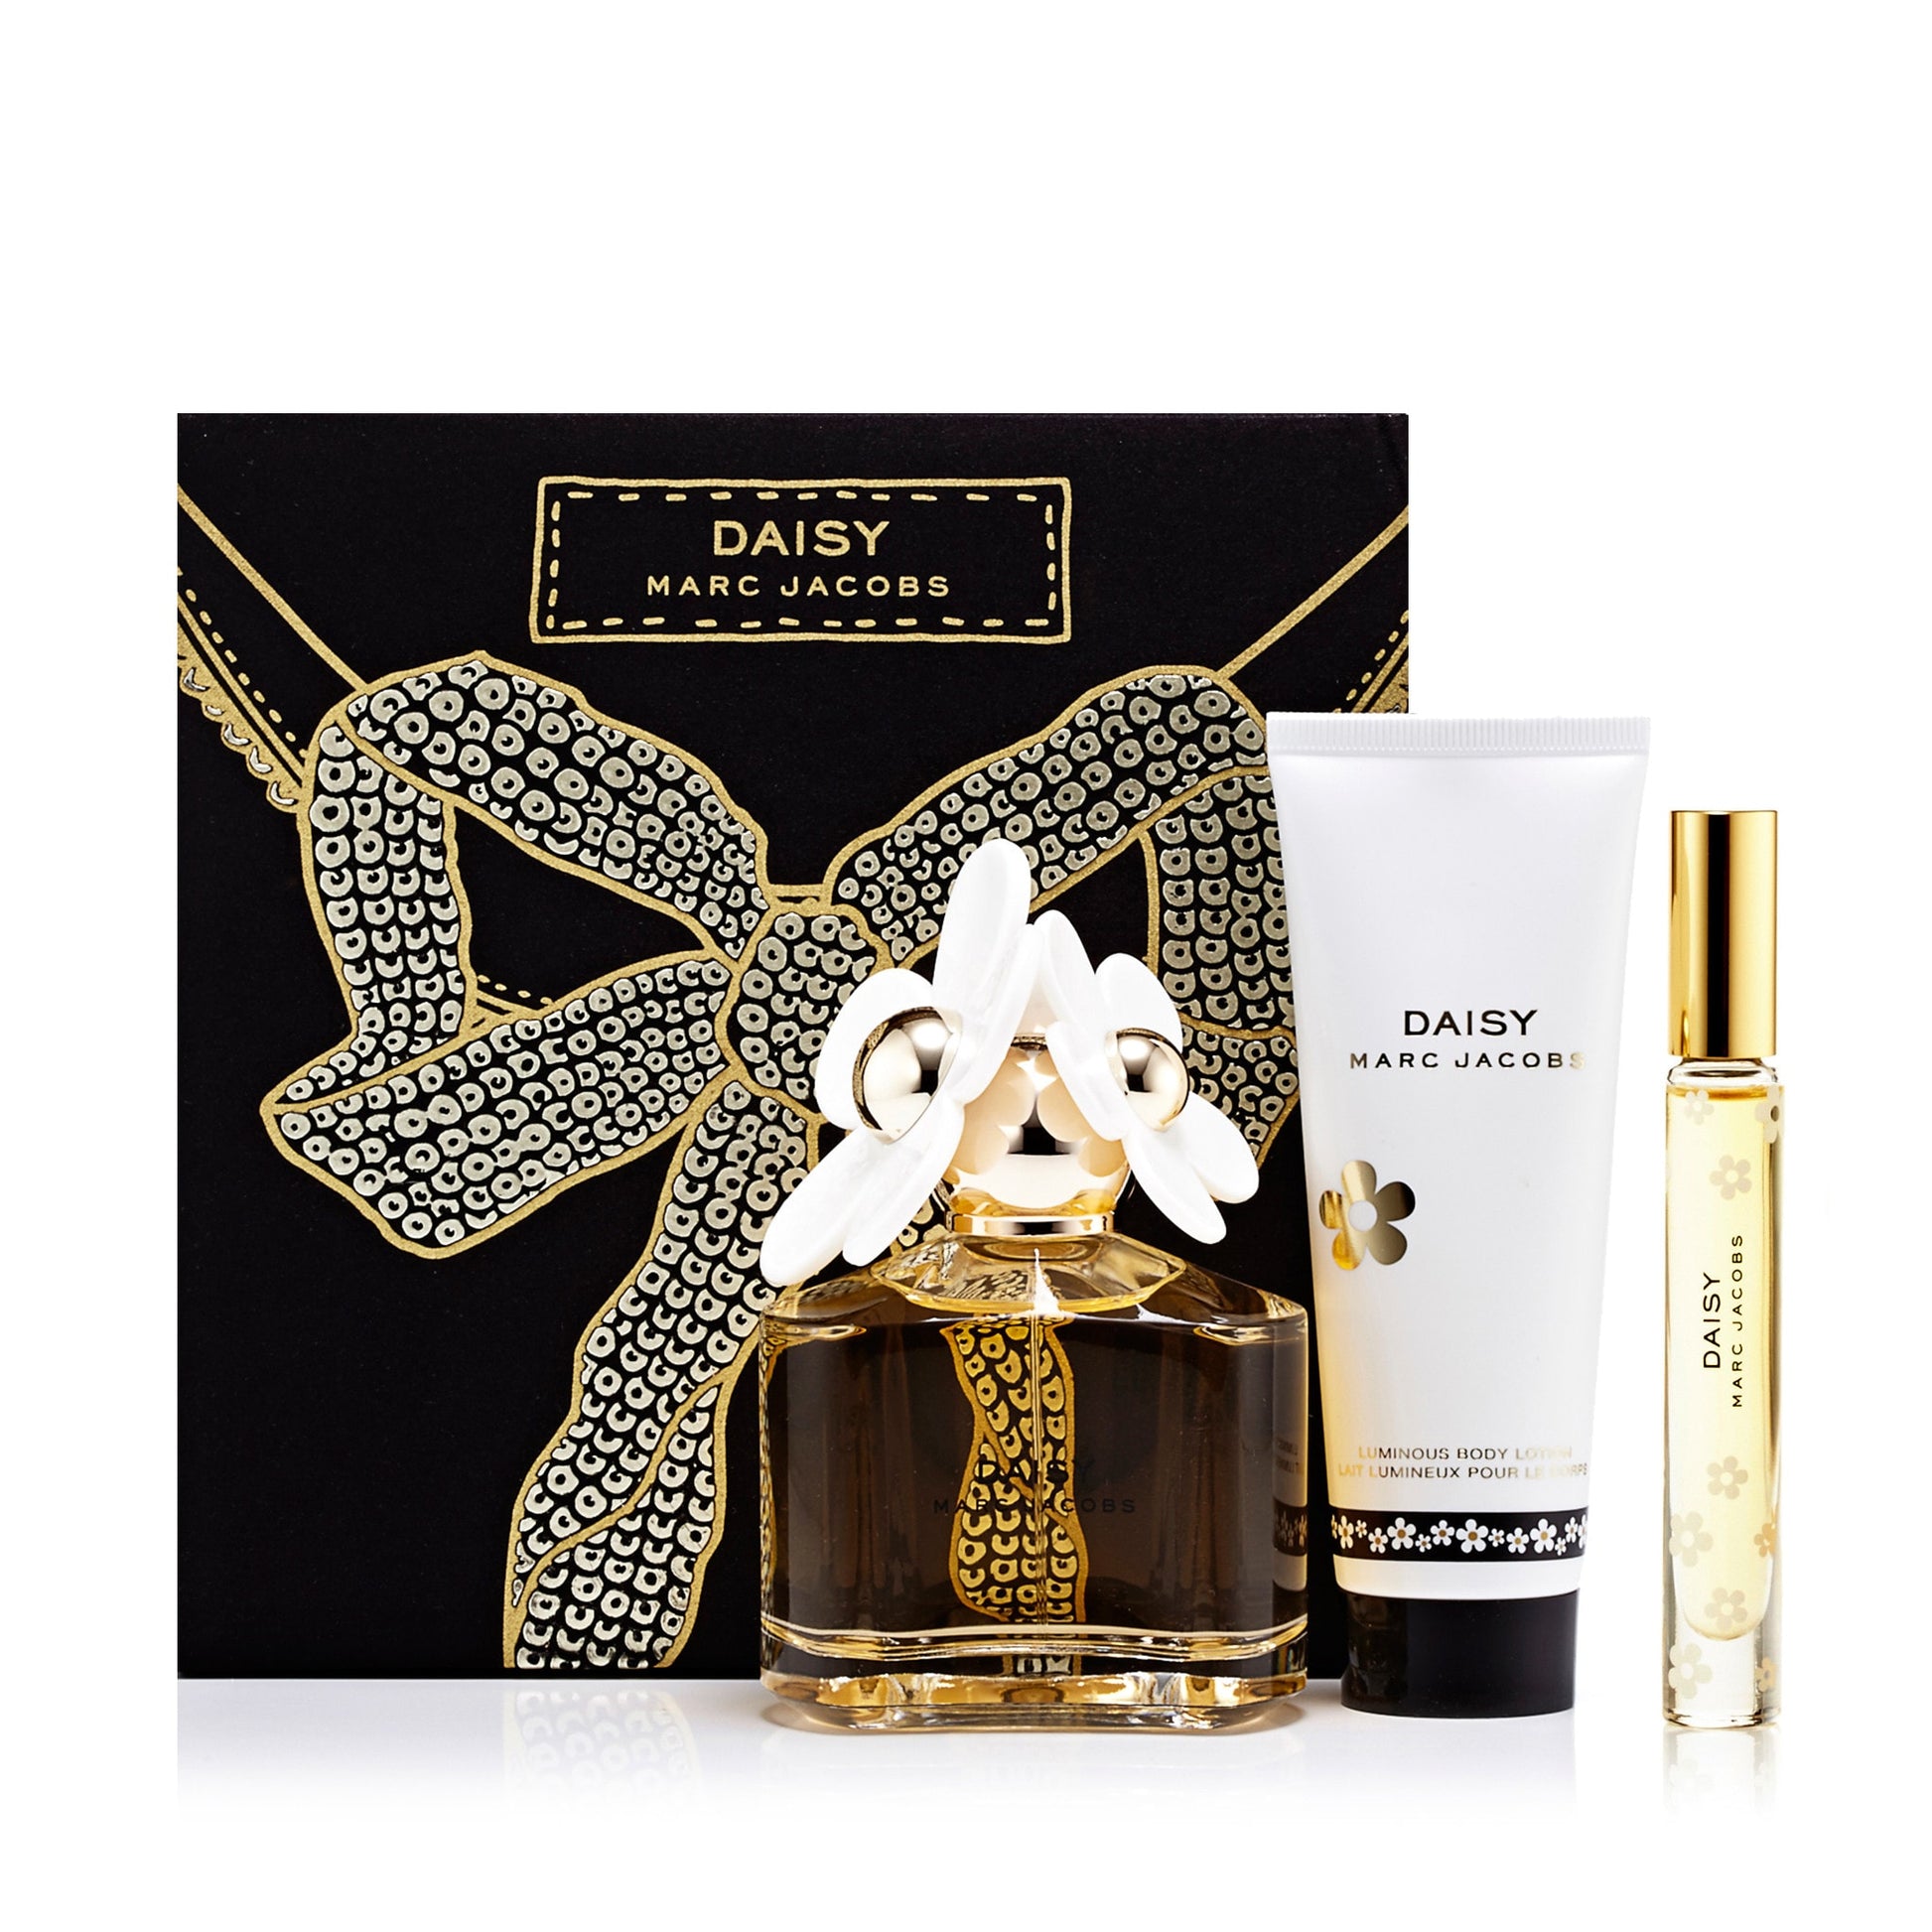 Daisy Gift Set Eau de Toilette, Body Lotion, Rollerball for Women by Marc Jacobs, Product image 2